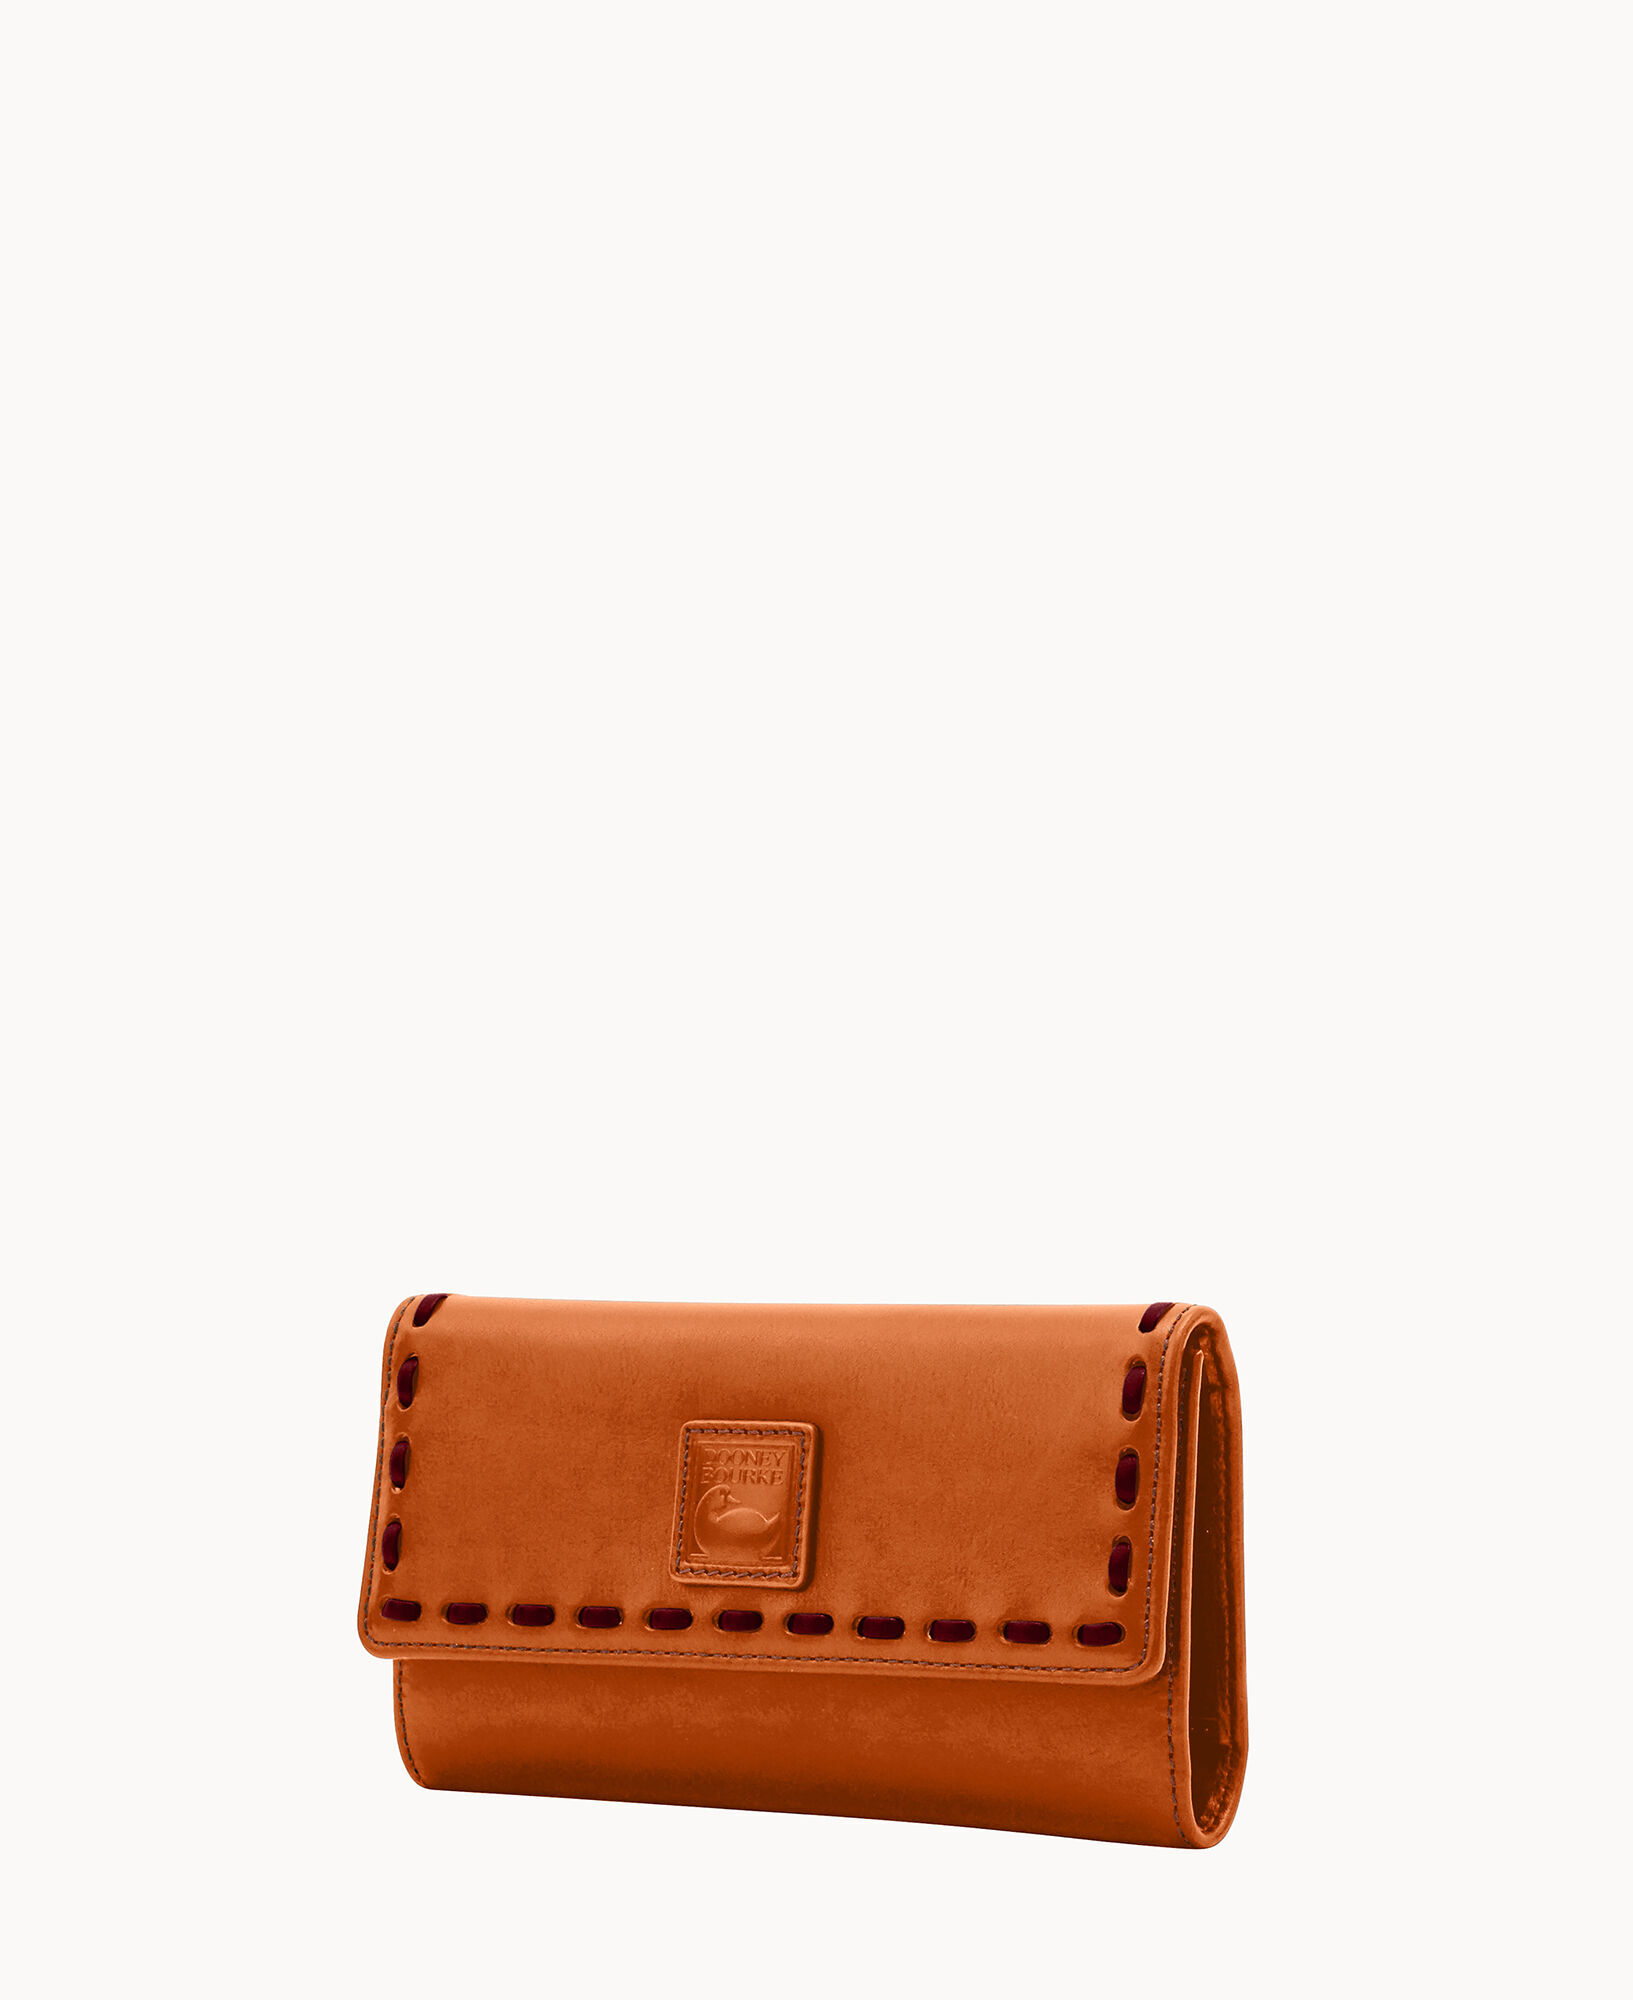 Does anyone have any info on how to score this Favorite MM bag. Iv